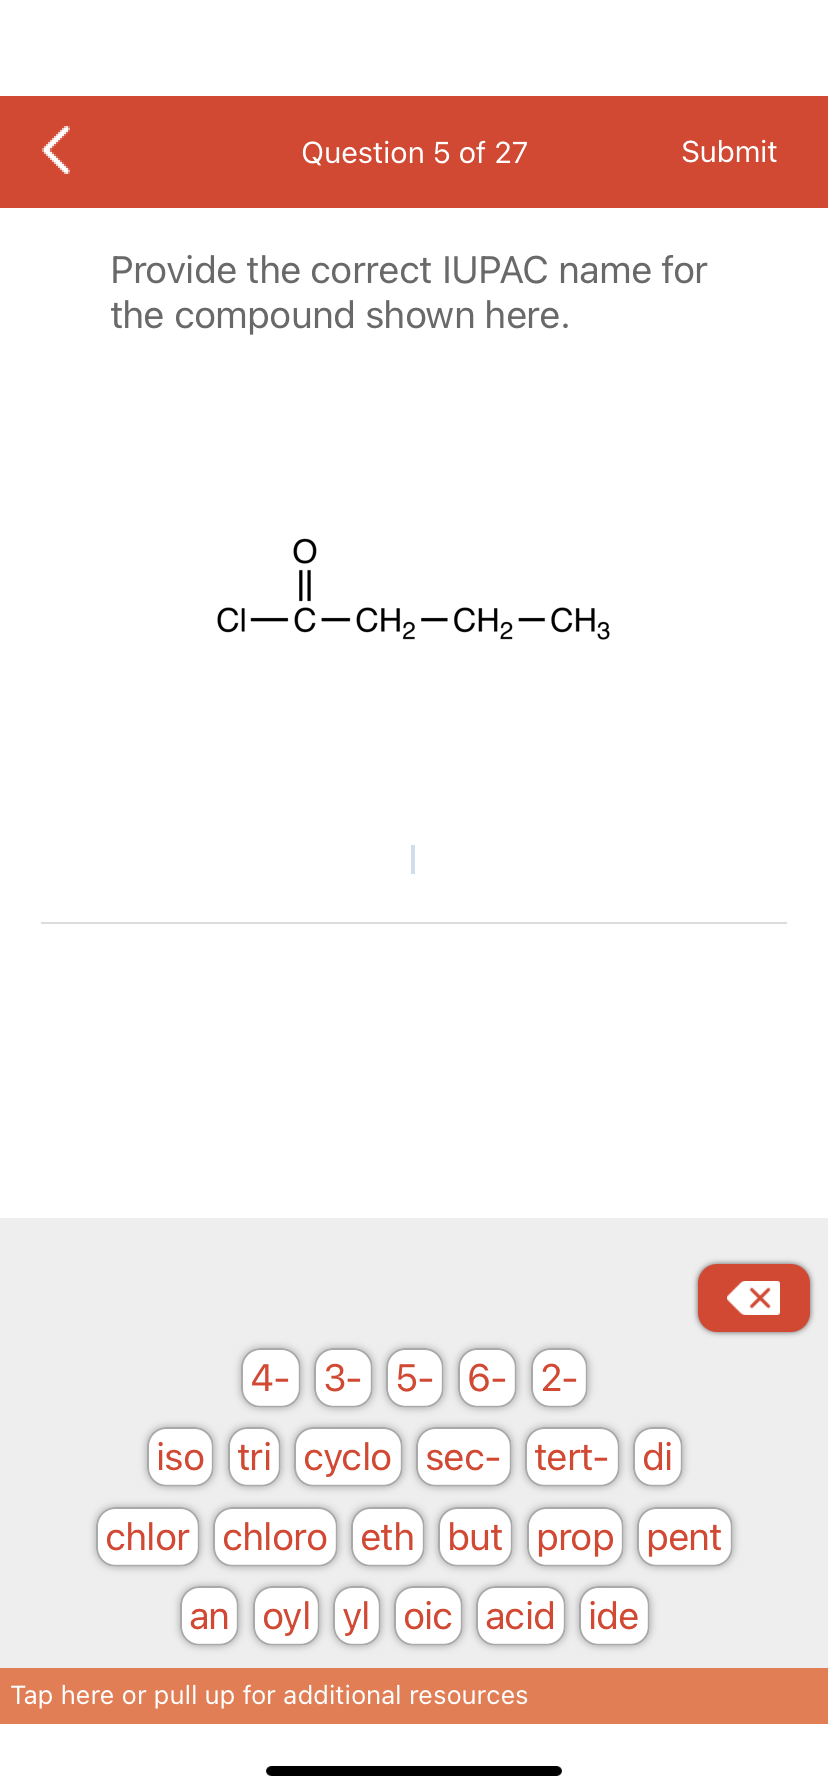 Question 5 of 27
Provide the correct IUPAC name for
the compound shown here.
CI-C-CH₂-CH₂-CH3
Submit
4- 3- 5- 6- 2-
iso tri cyclo sec- tert- di
chlor chloro eth] (but prop pent
an oyl yl oic acid ide
Tap here or pull up for additional resources
X